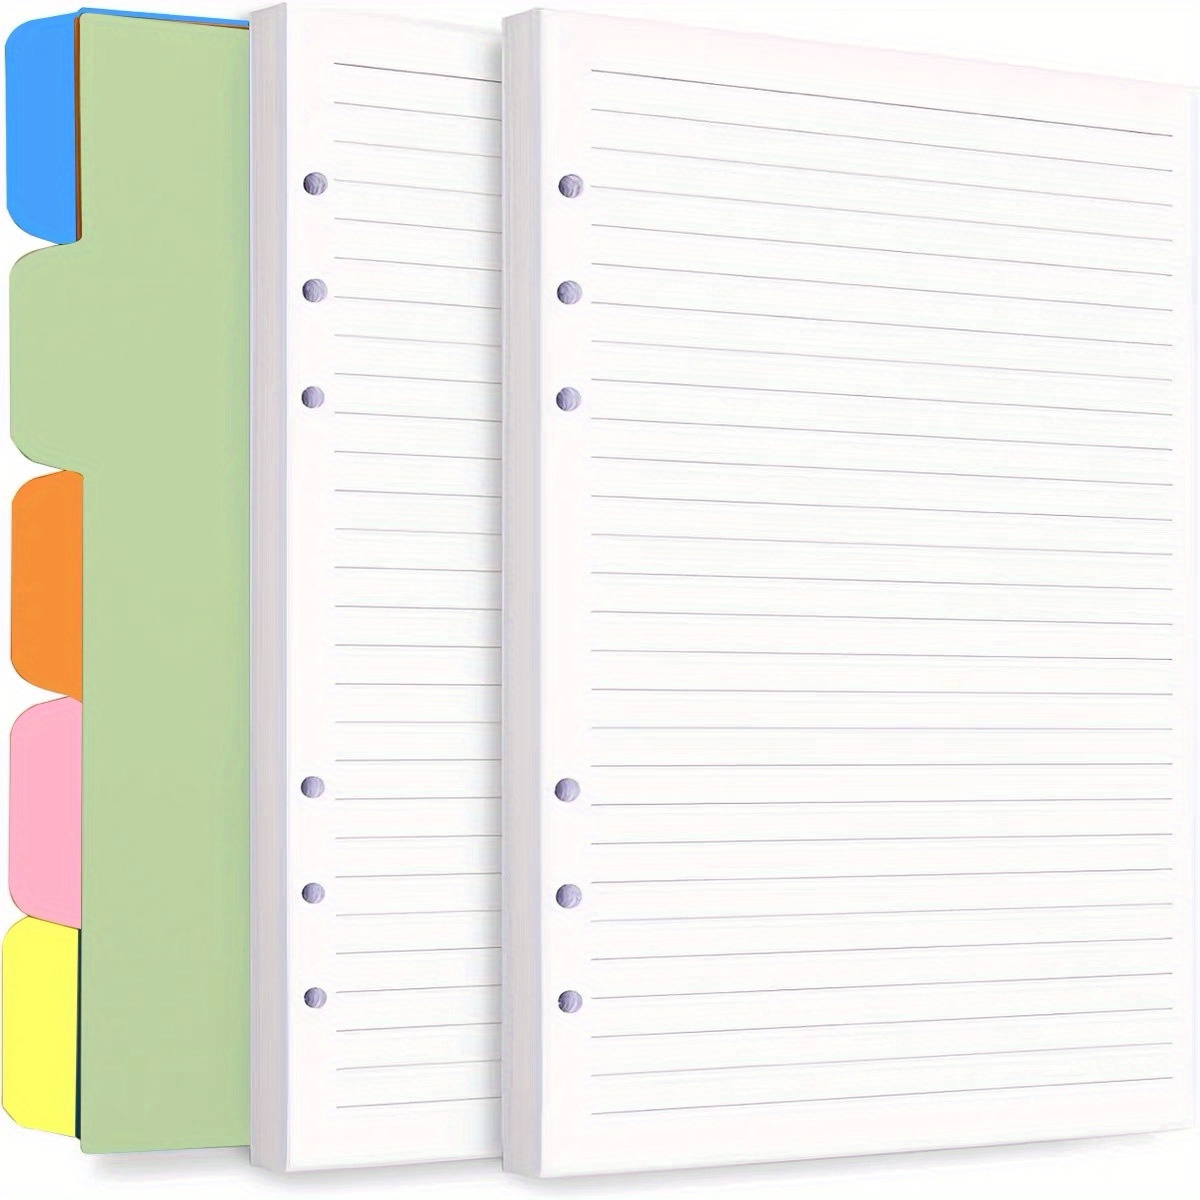 A5/A6 Size 7-Type Binder Planner Refills (40 Sheets) – Bujo & Marks